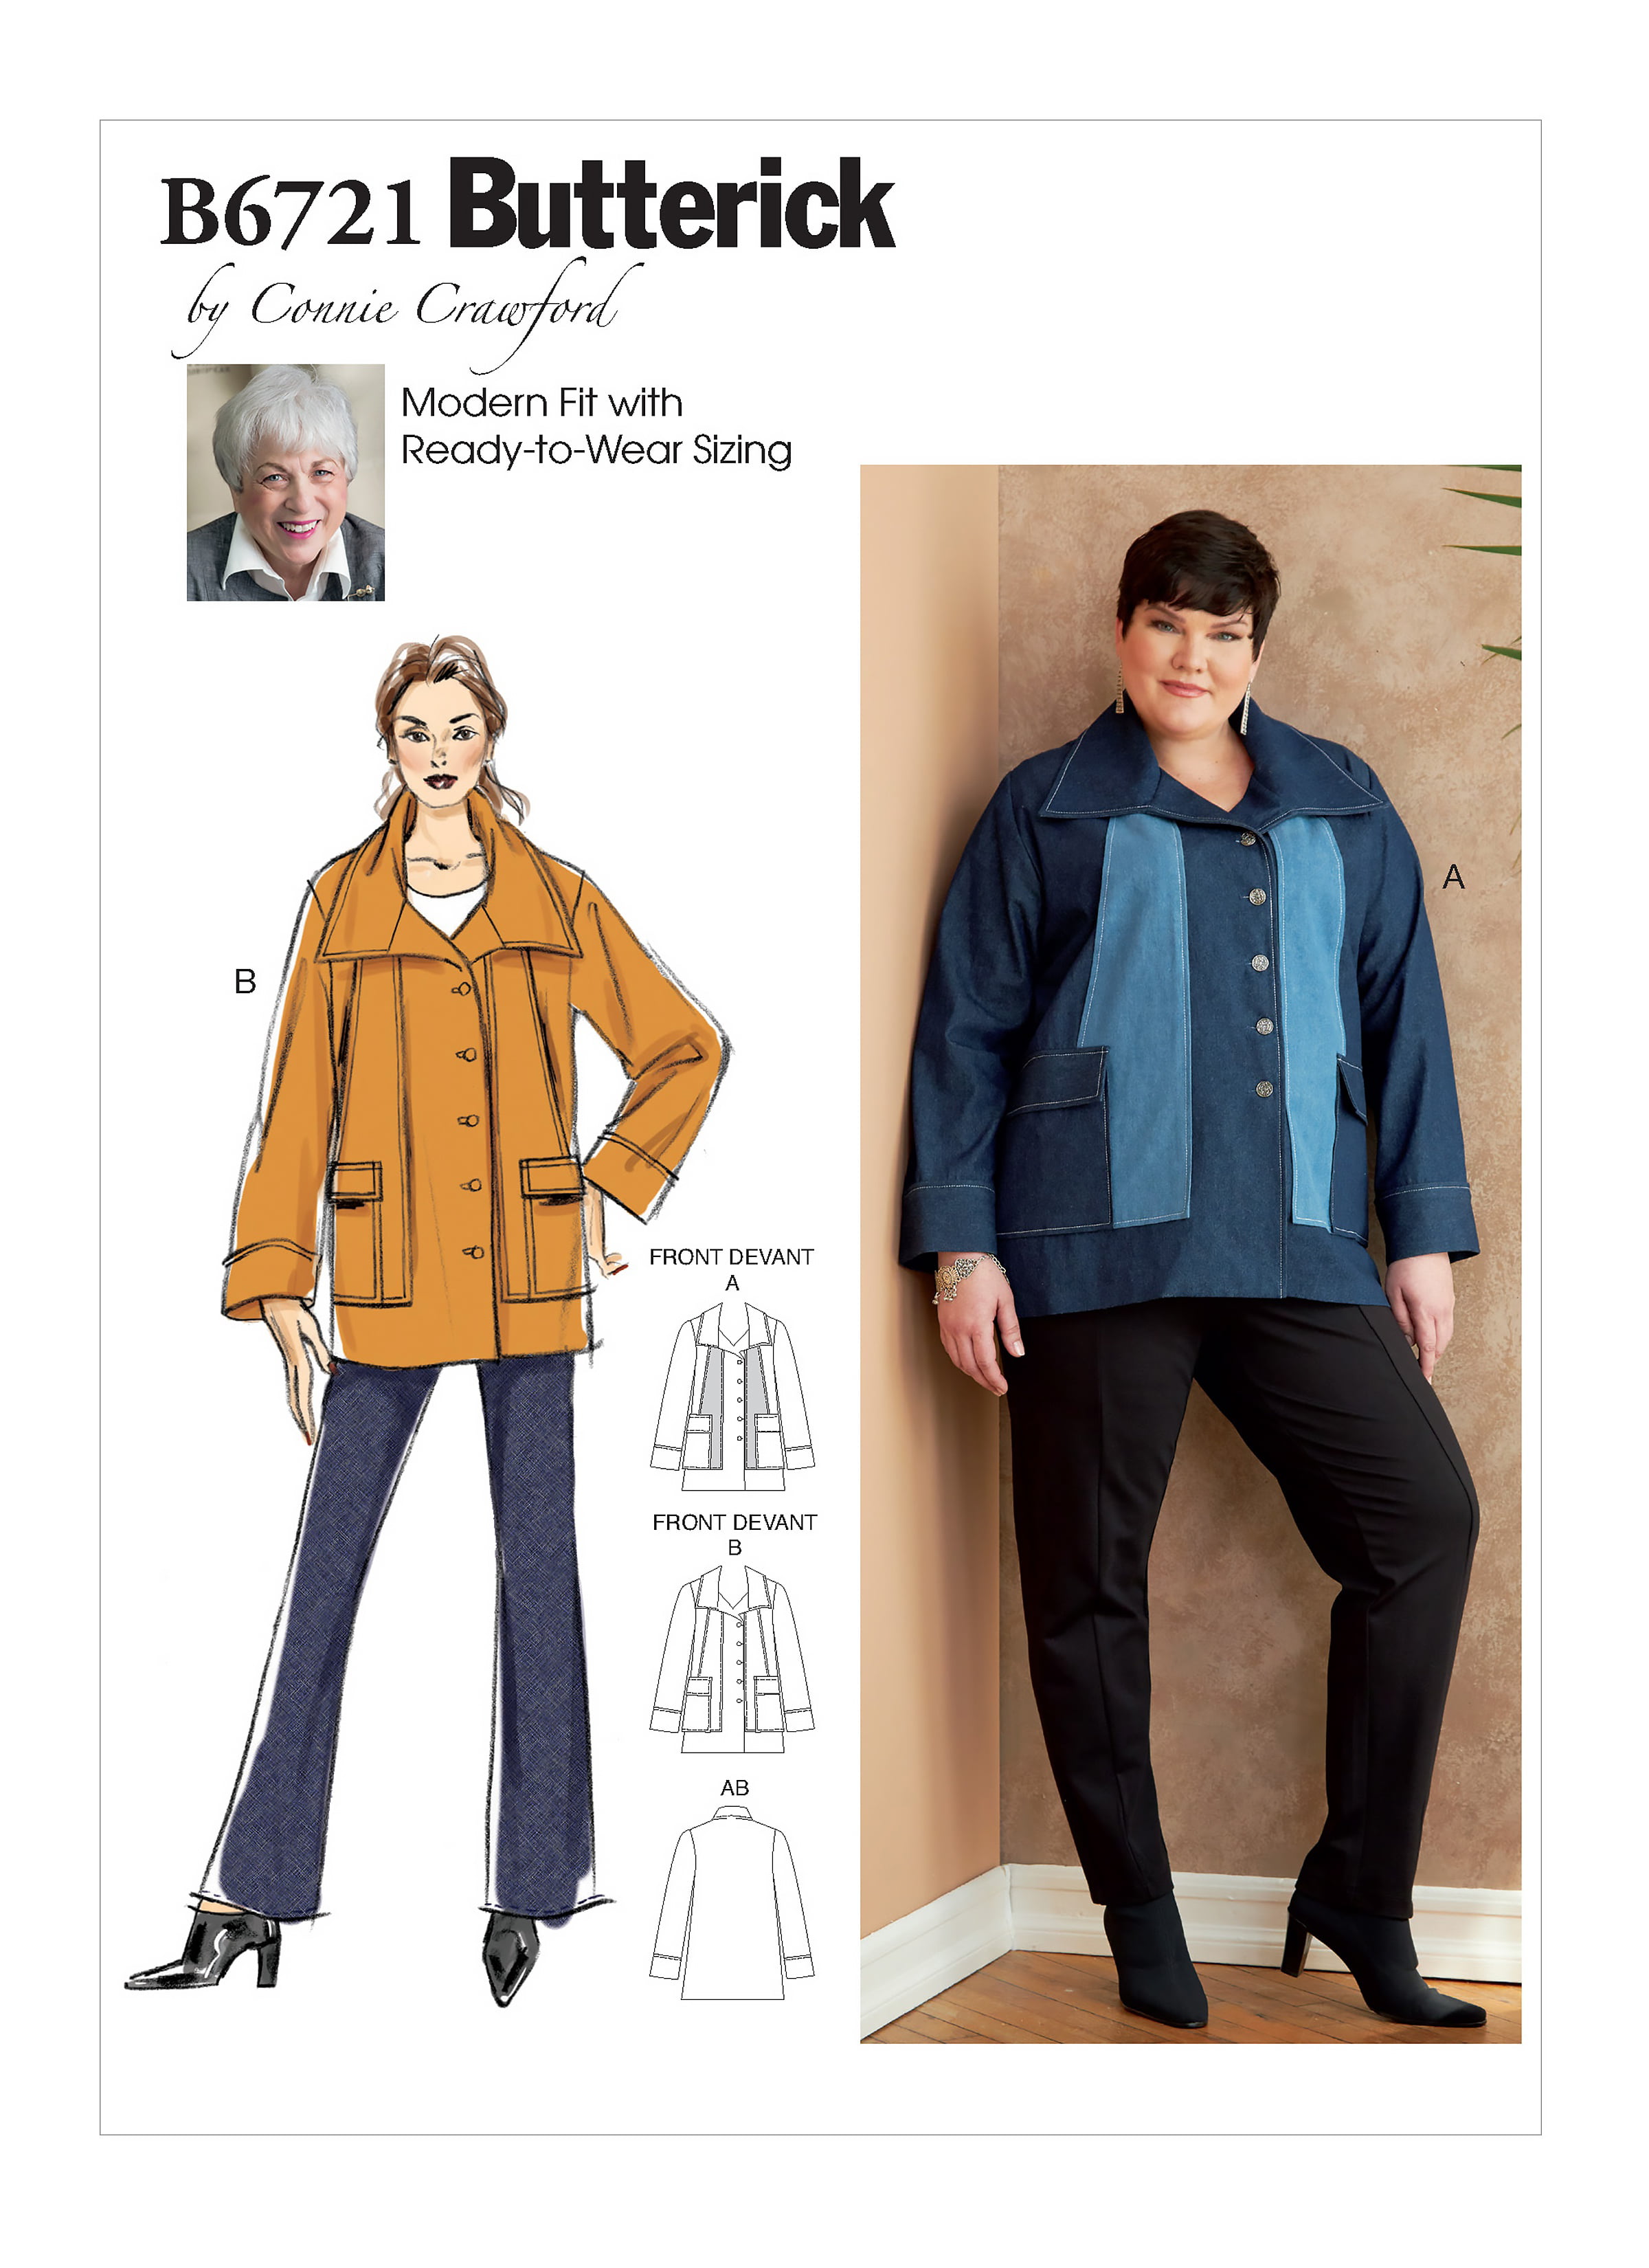 Butterick Pattern: Connie Crawford, Misses'/Women's Outerwear Sizes S-M ...